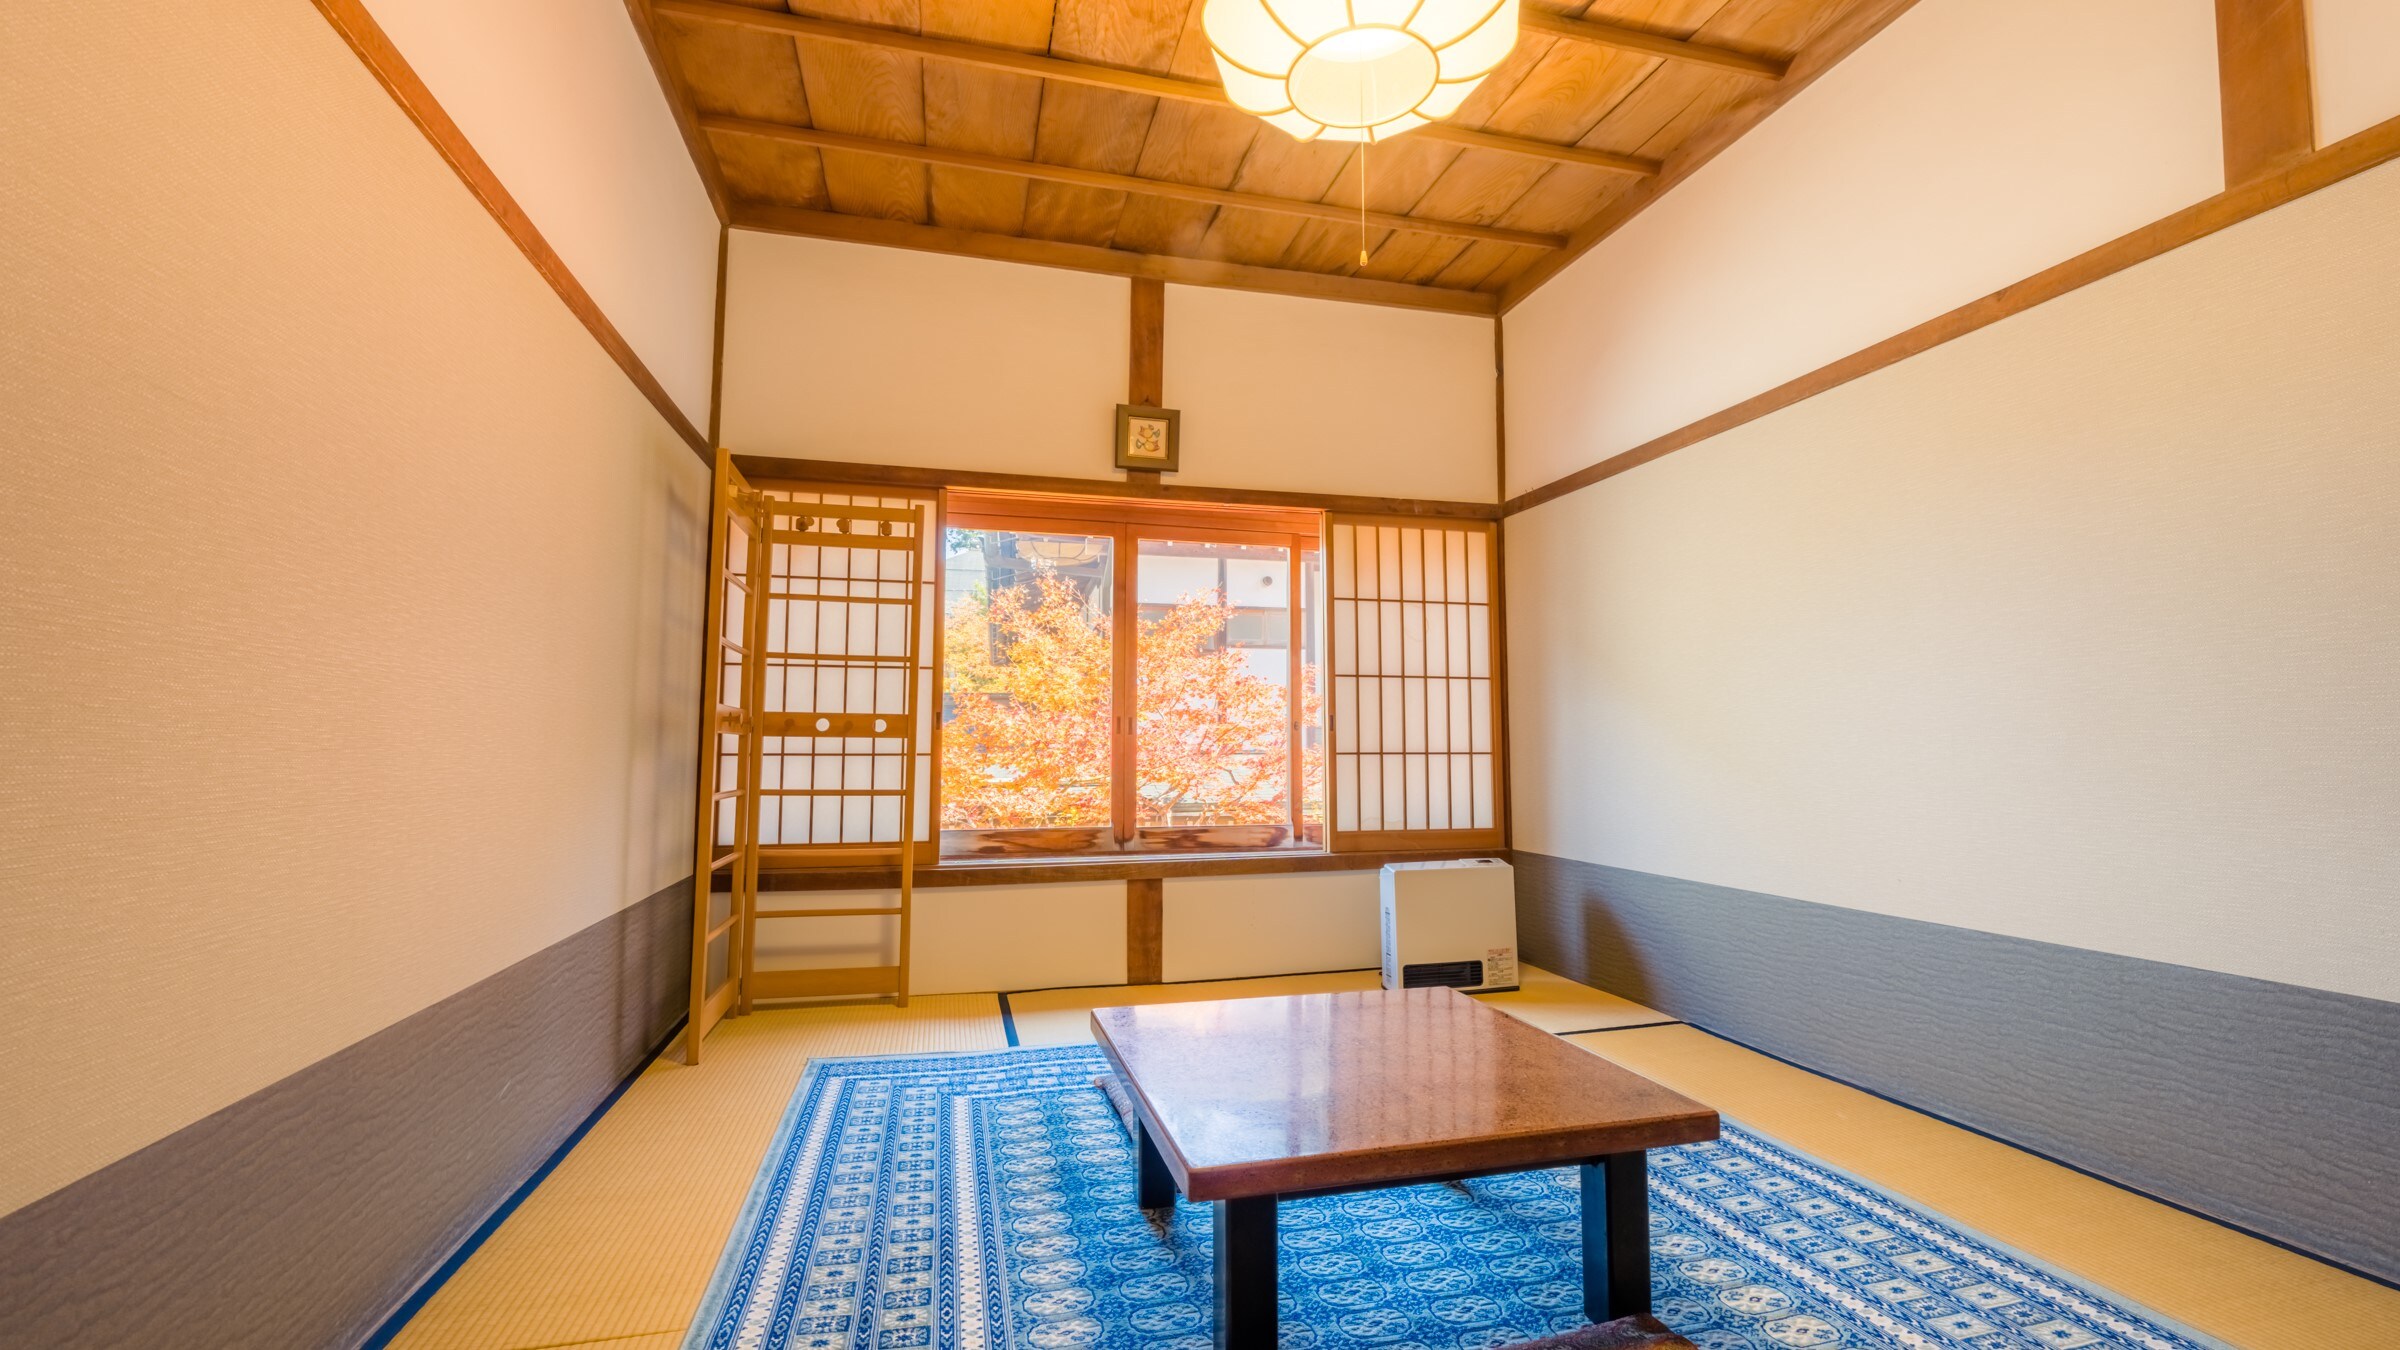 An example of a compact Japanese-style room